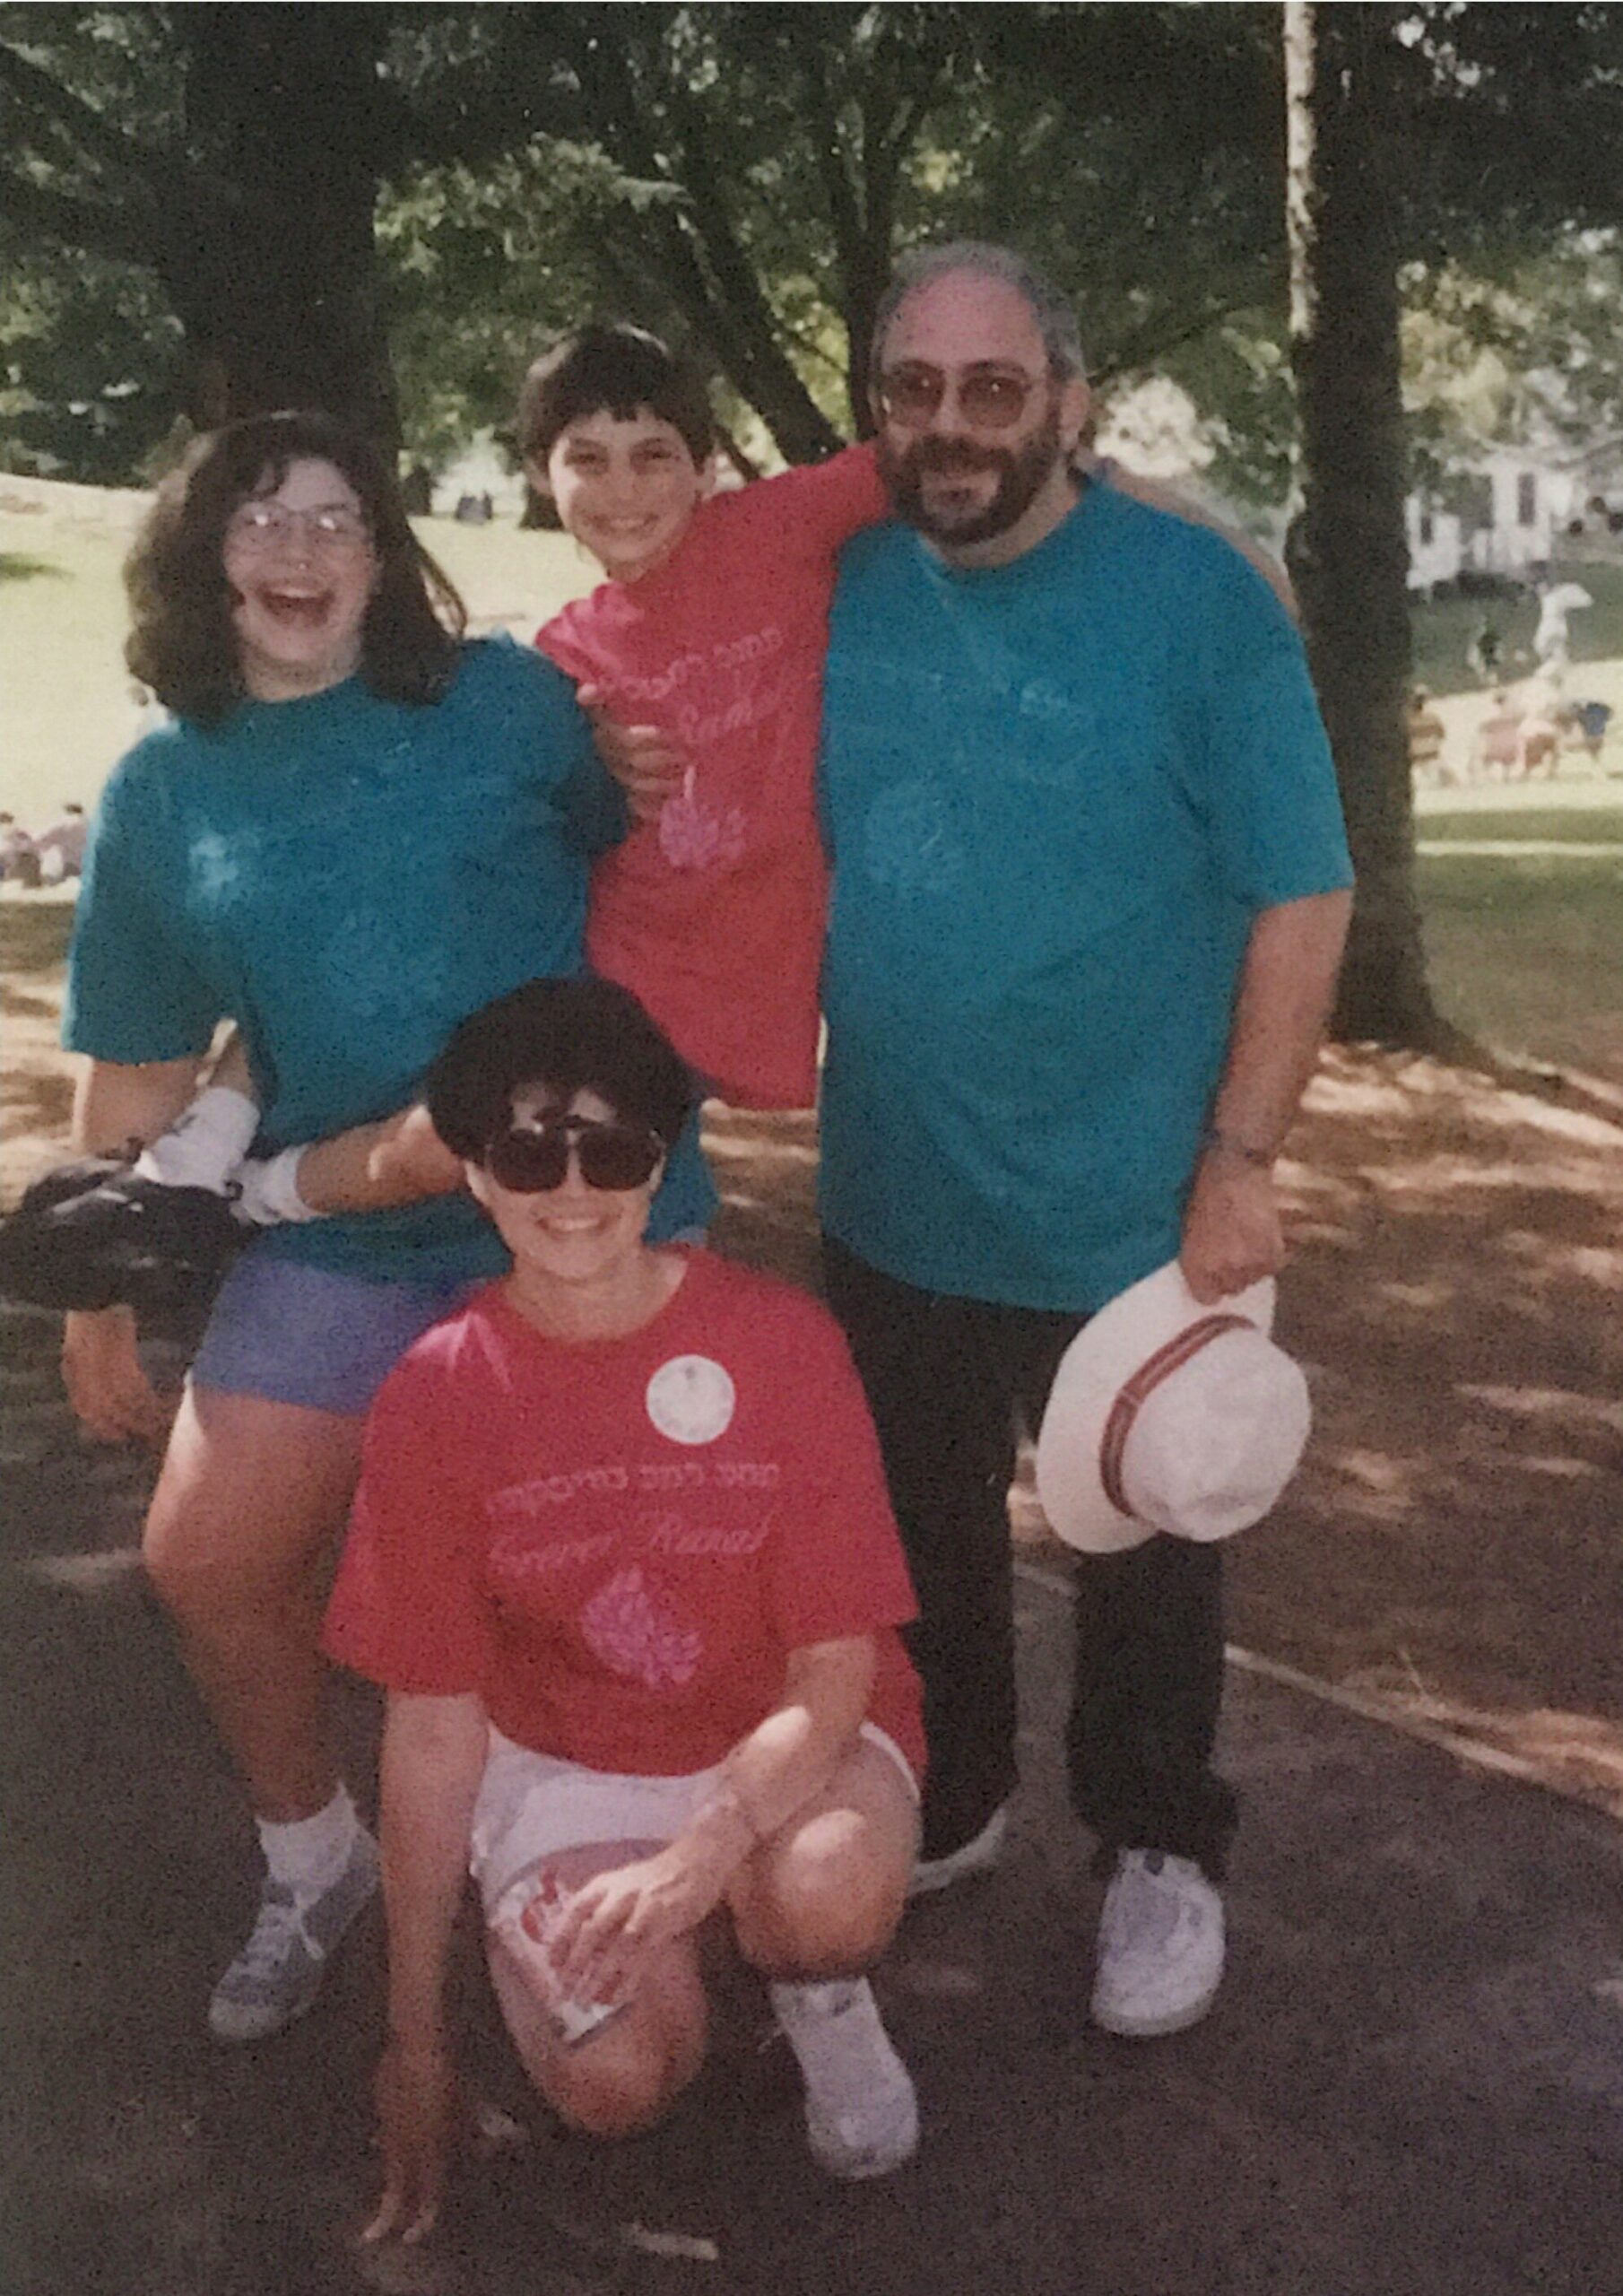 The Drazen Family at camp in 1994.